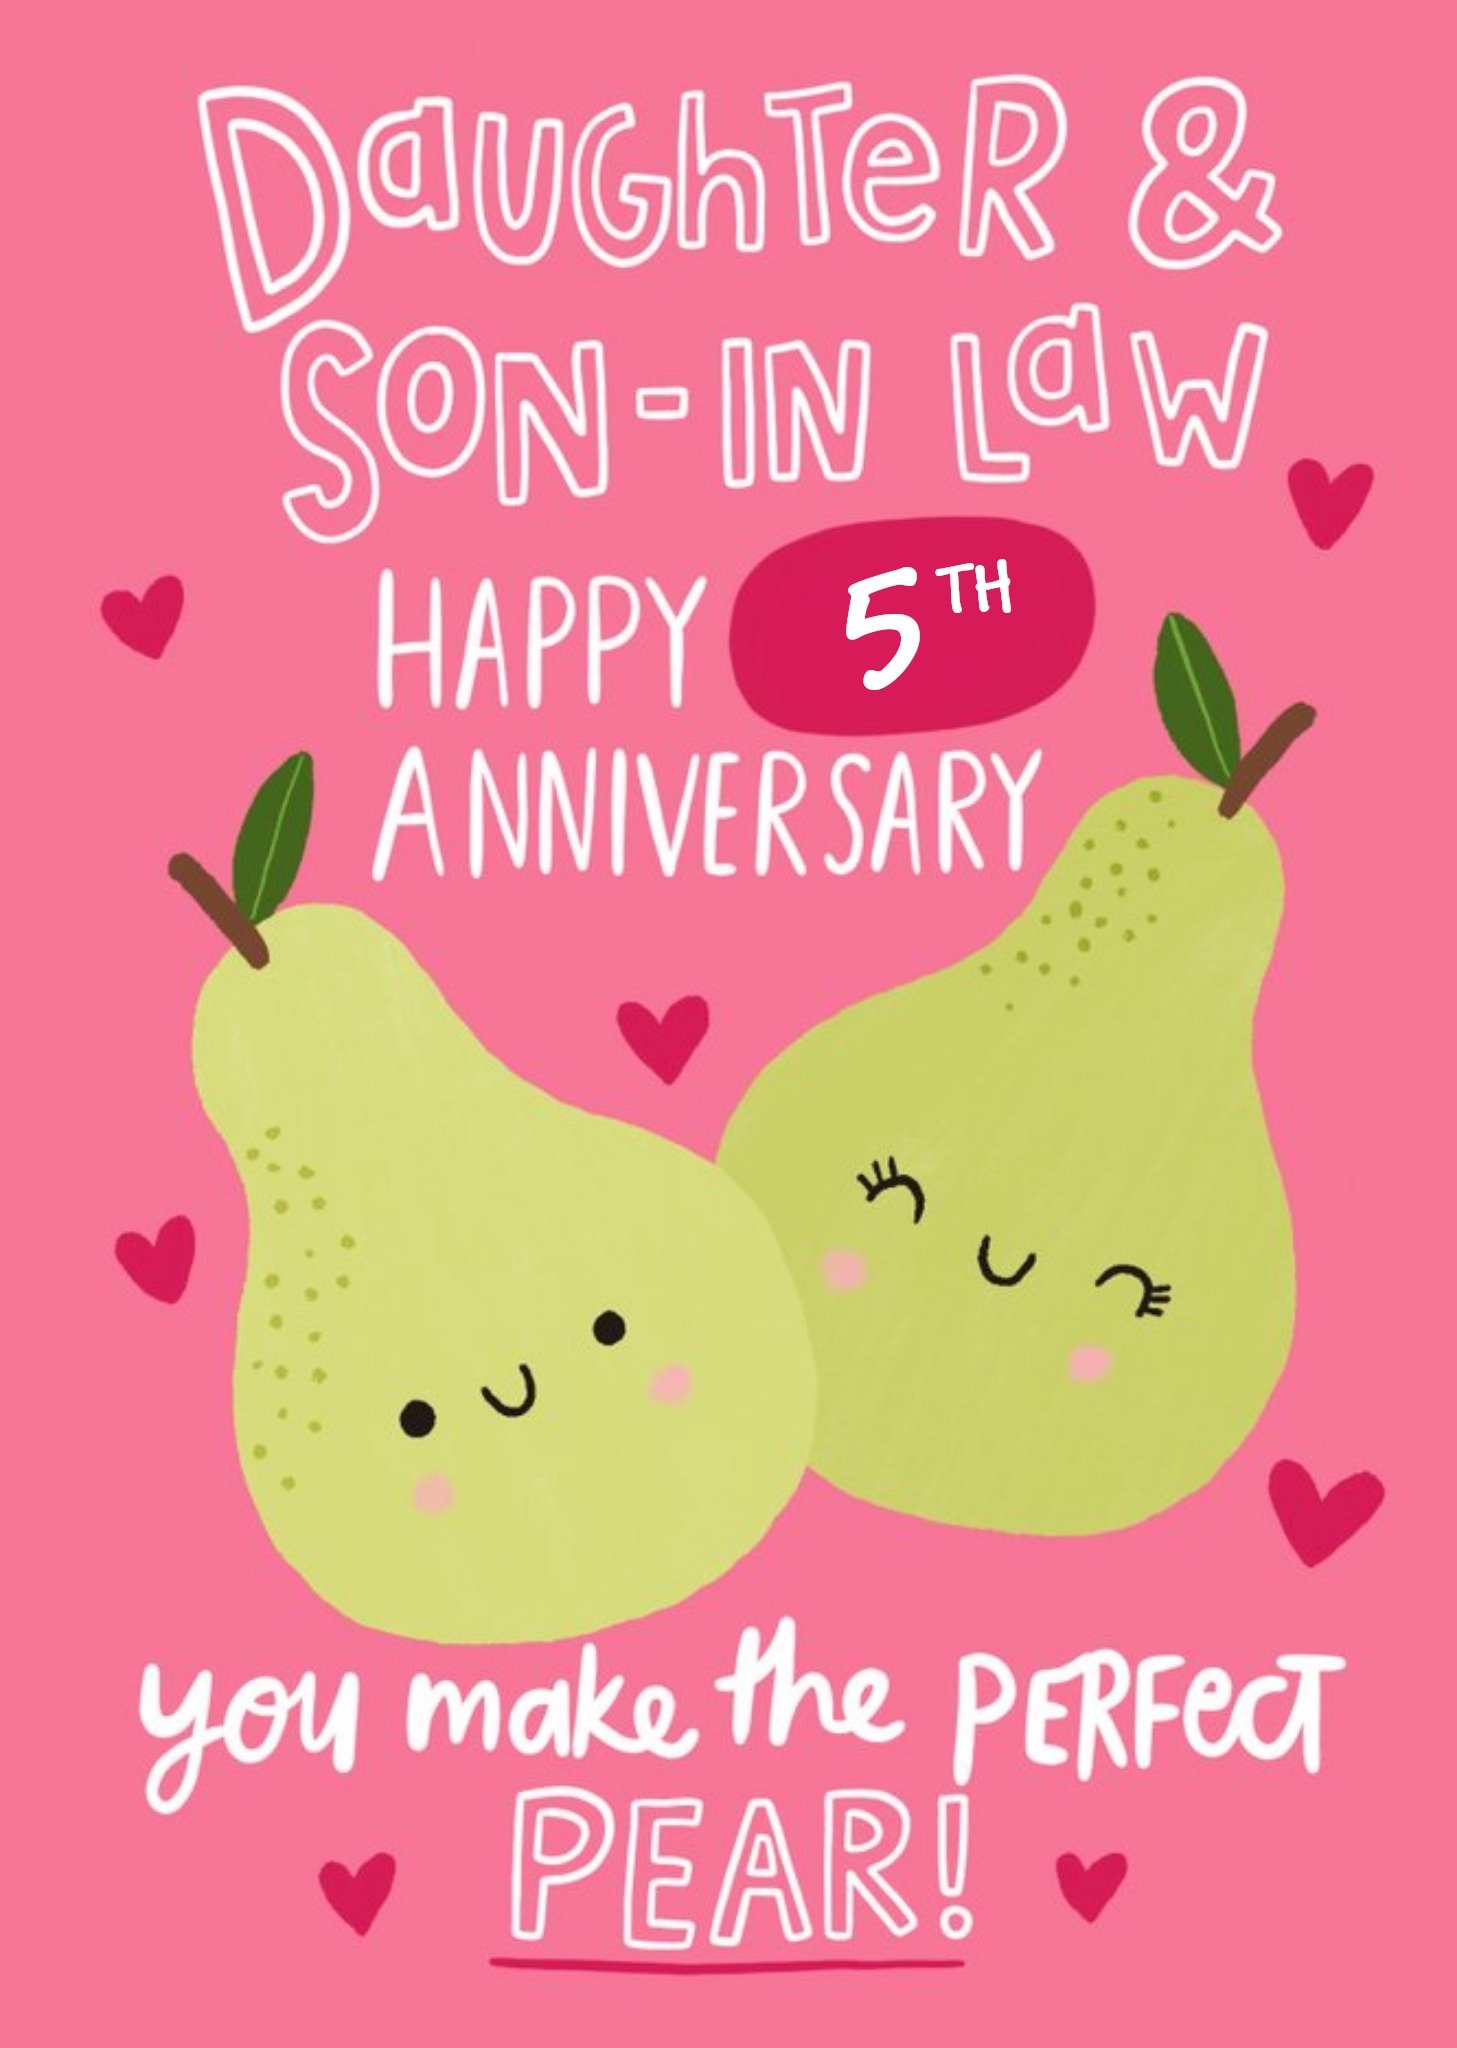 Moonpig Illustration Of Two Pears On A Pink Background Daughter And Son In Law Anniversary Card Ecar